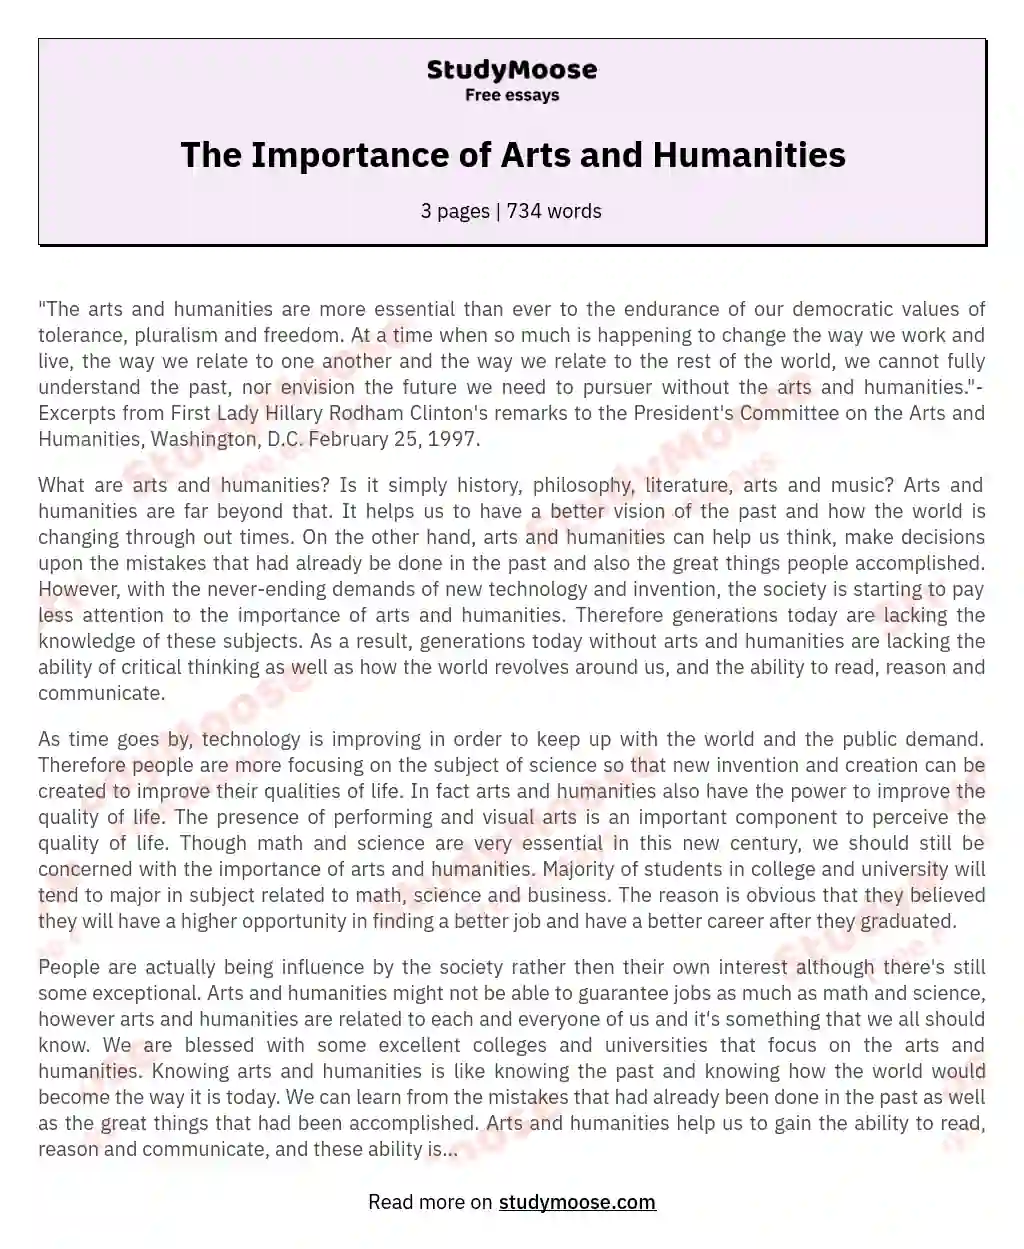 The Importance of Arts and Humanities essay